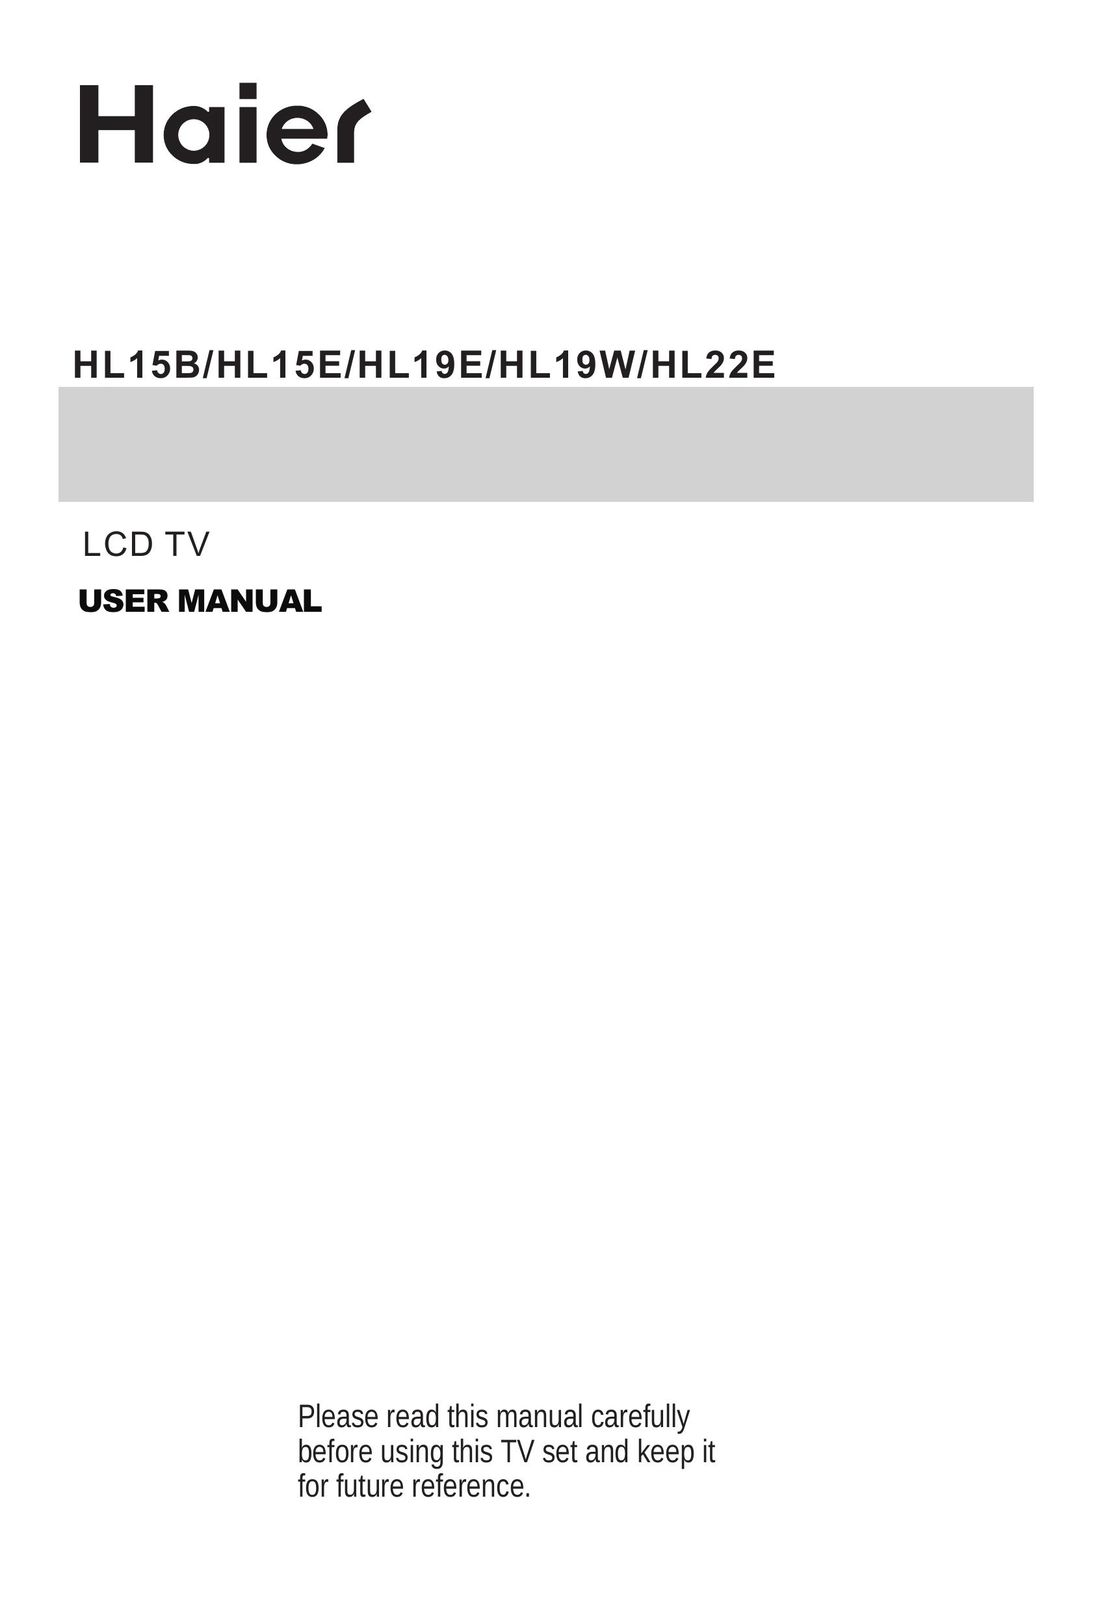 Haier HL19W Flat Panel Television User Manual